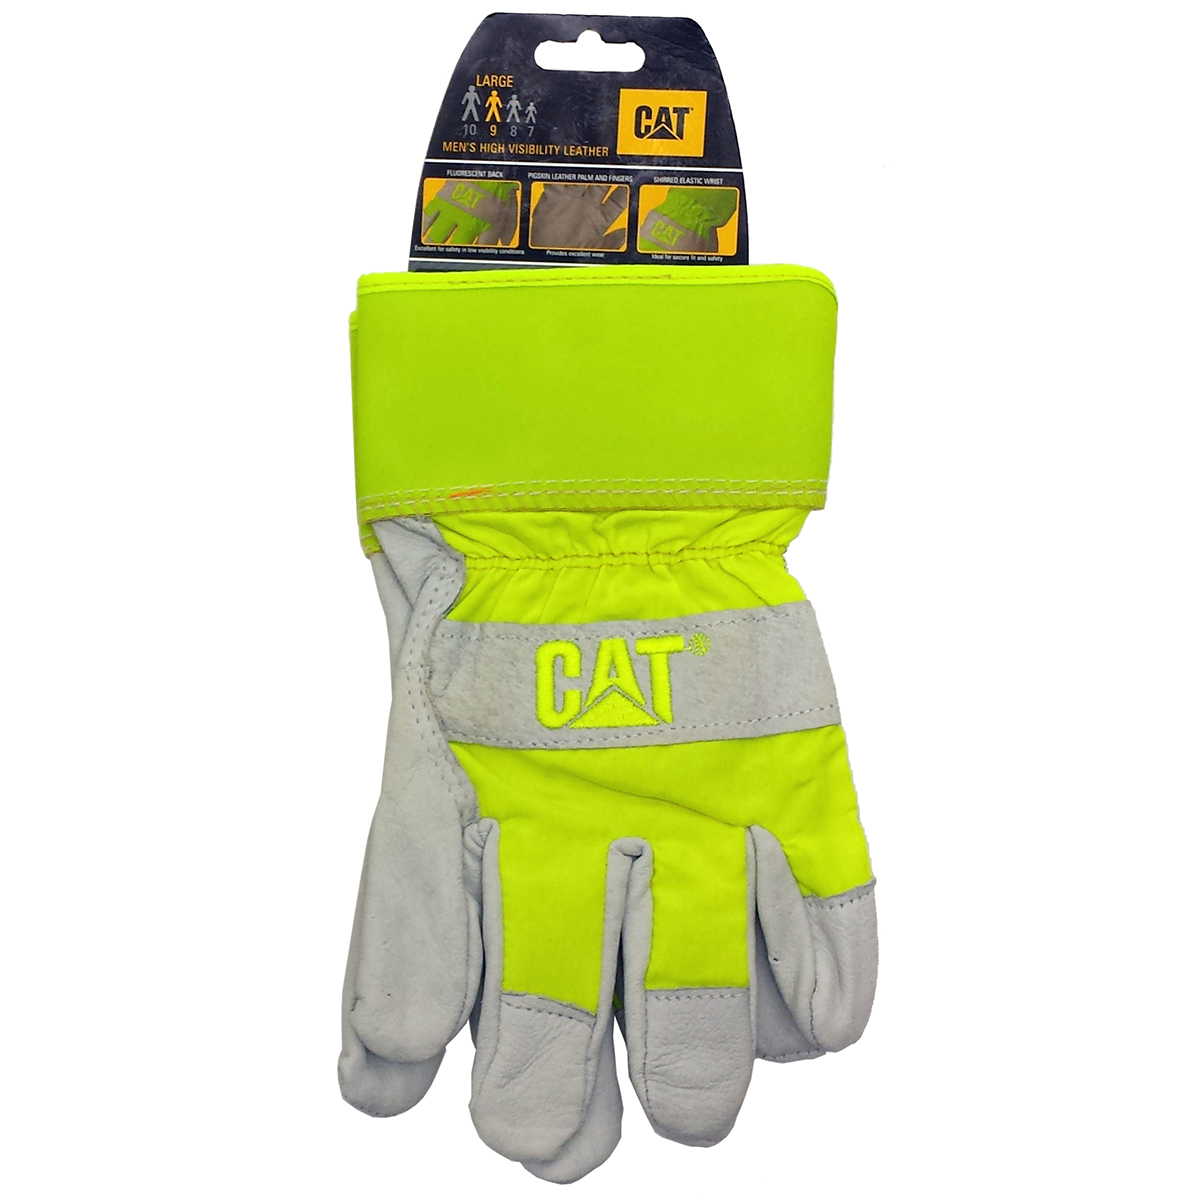 CAT CAT013103L Mens Size Large Gray/Green Pig Skin Palm Work Gloves - image 2 of 2